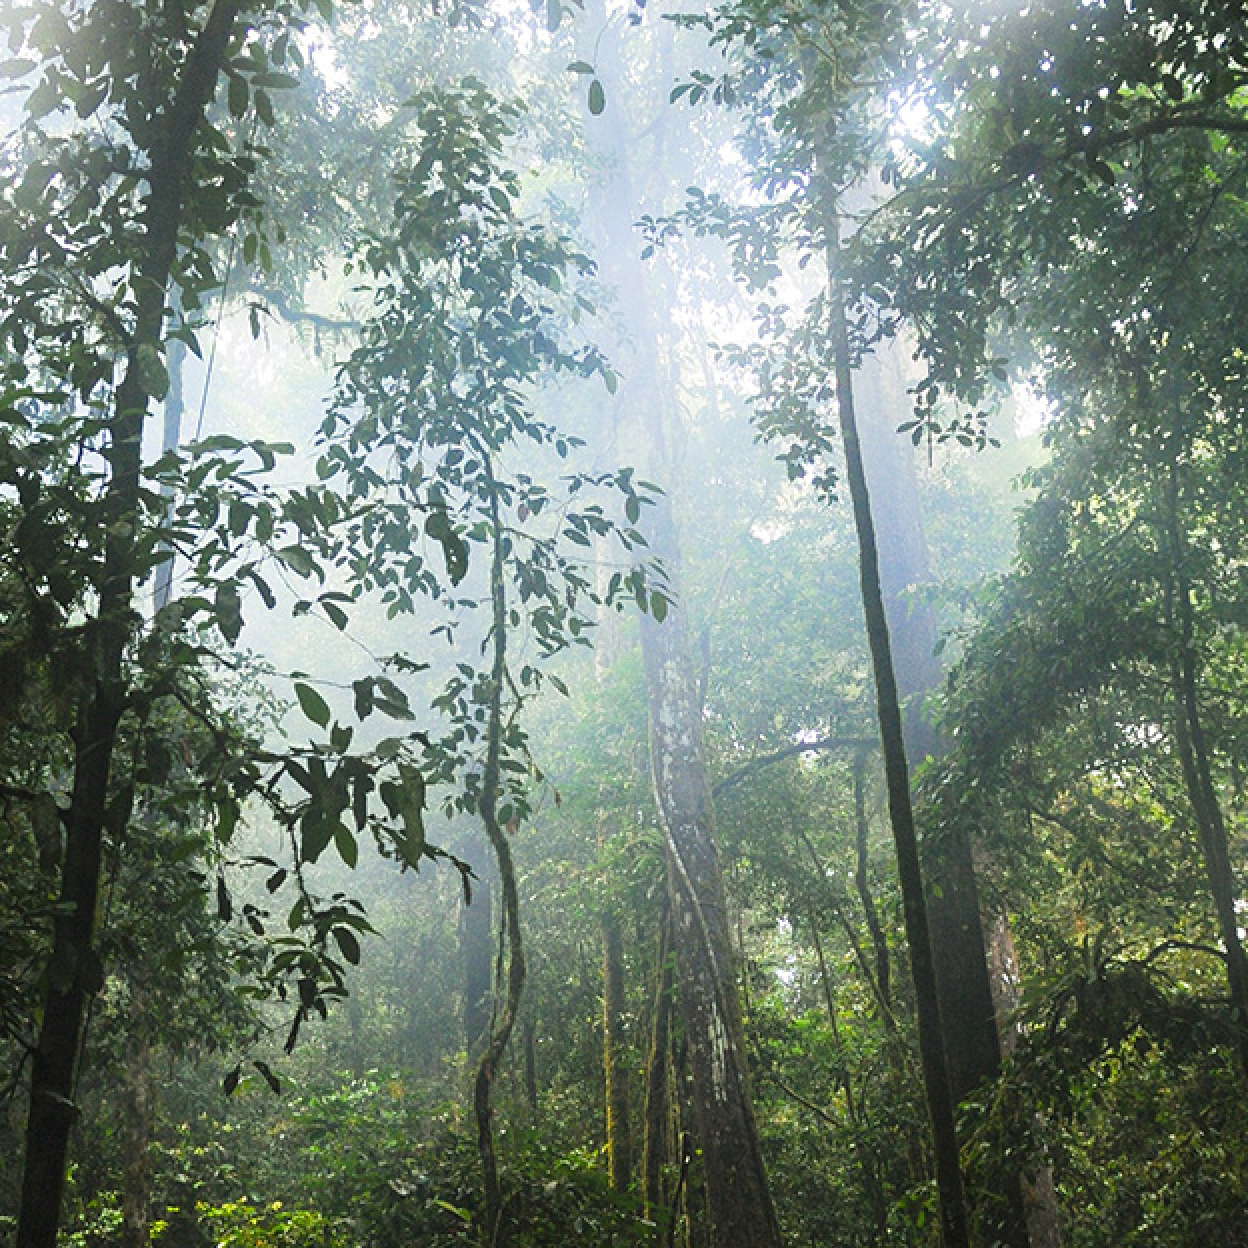 Trees in a misty rainforest